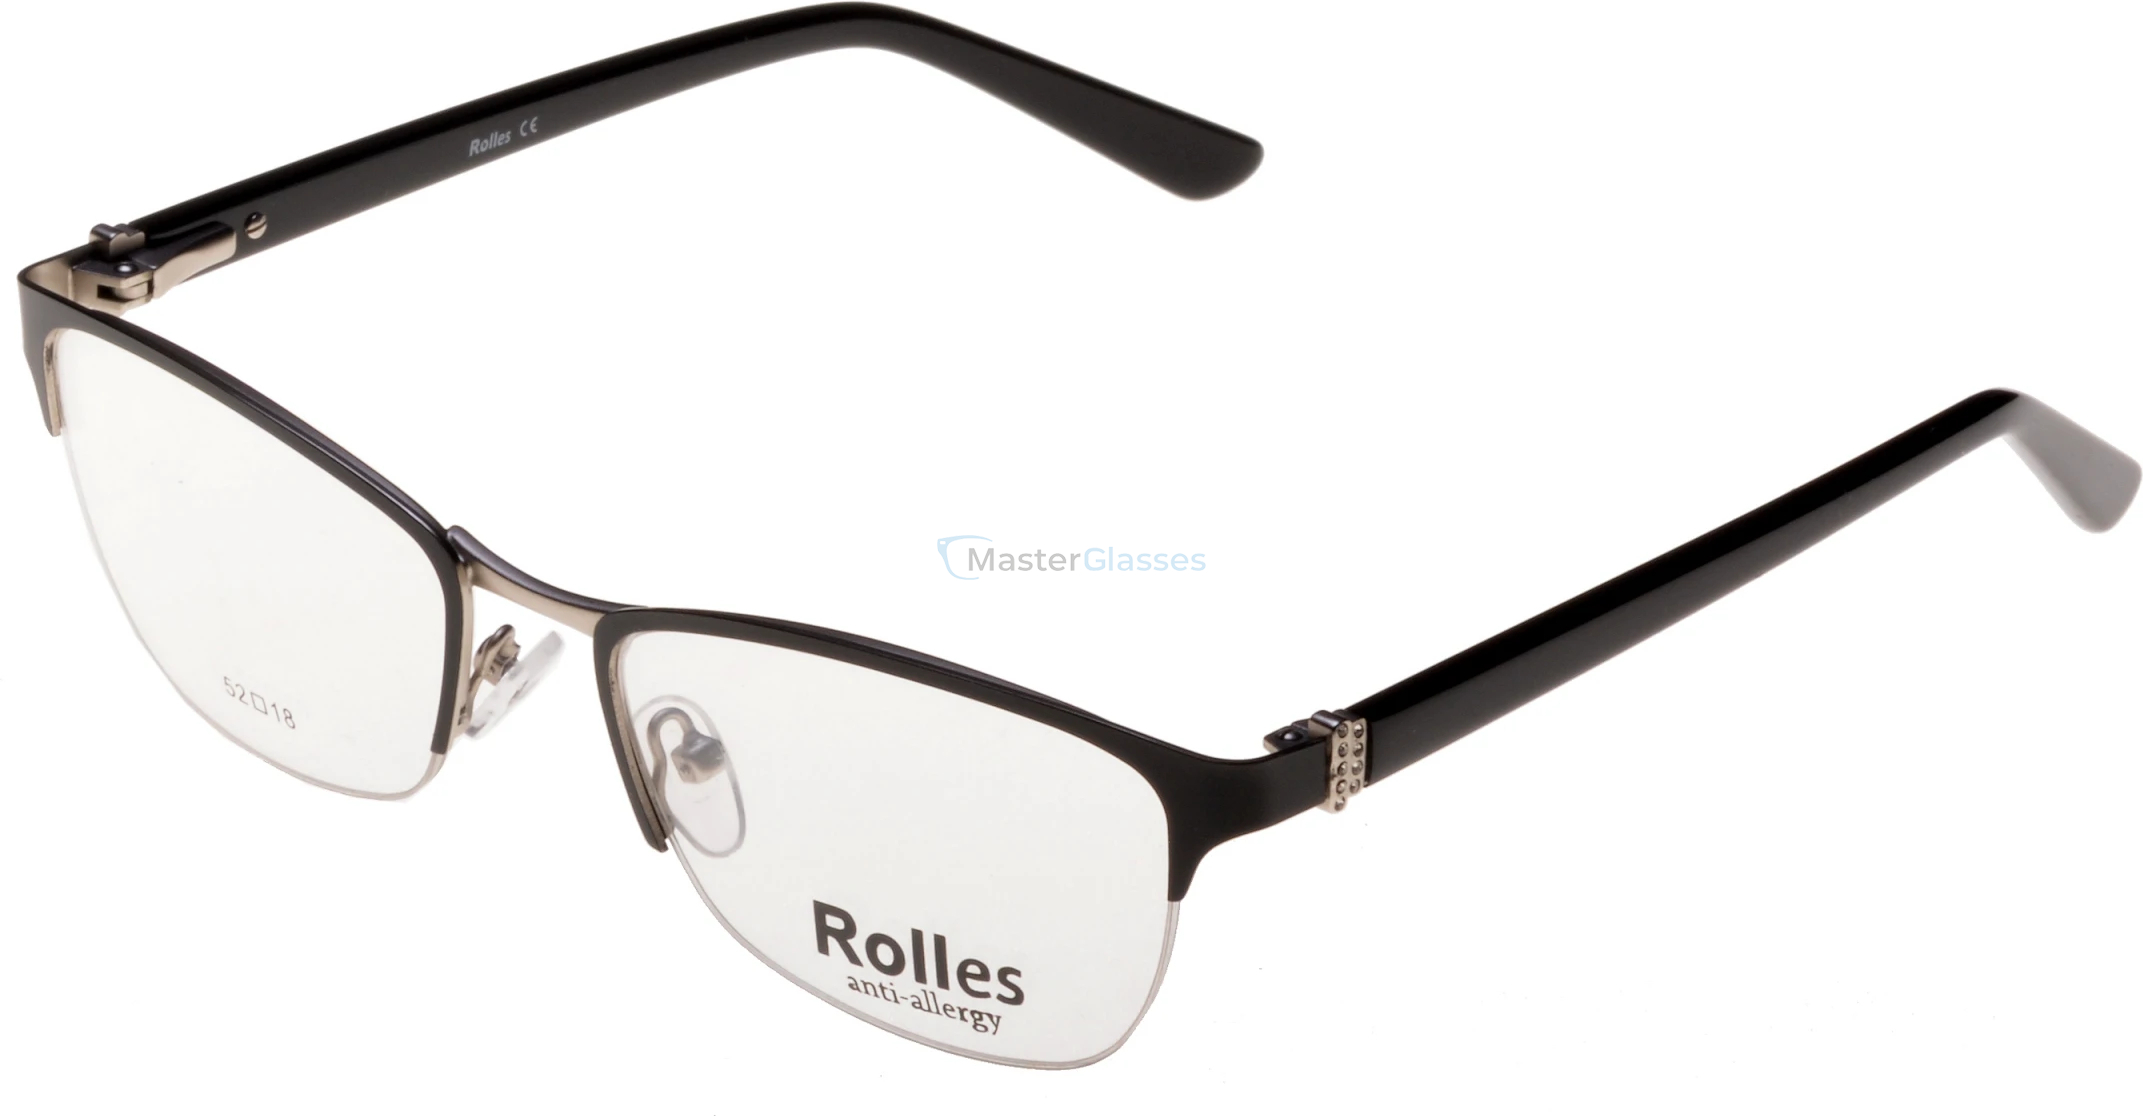  Rolles 471 03